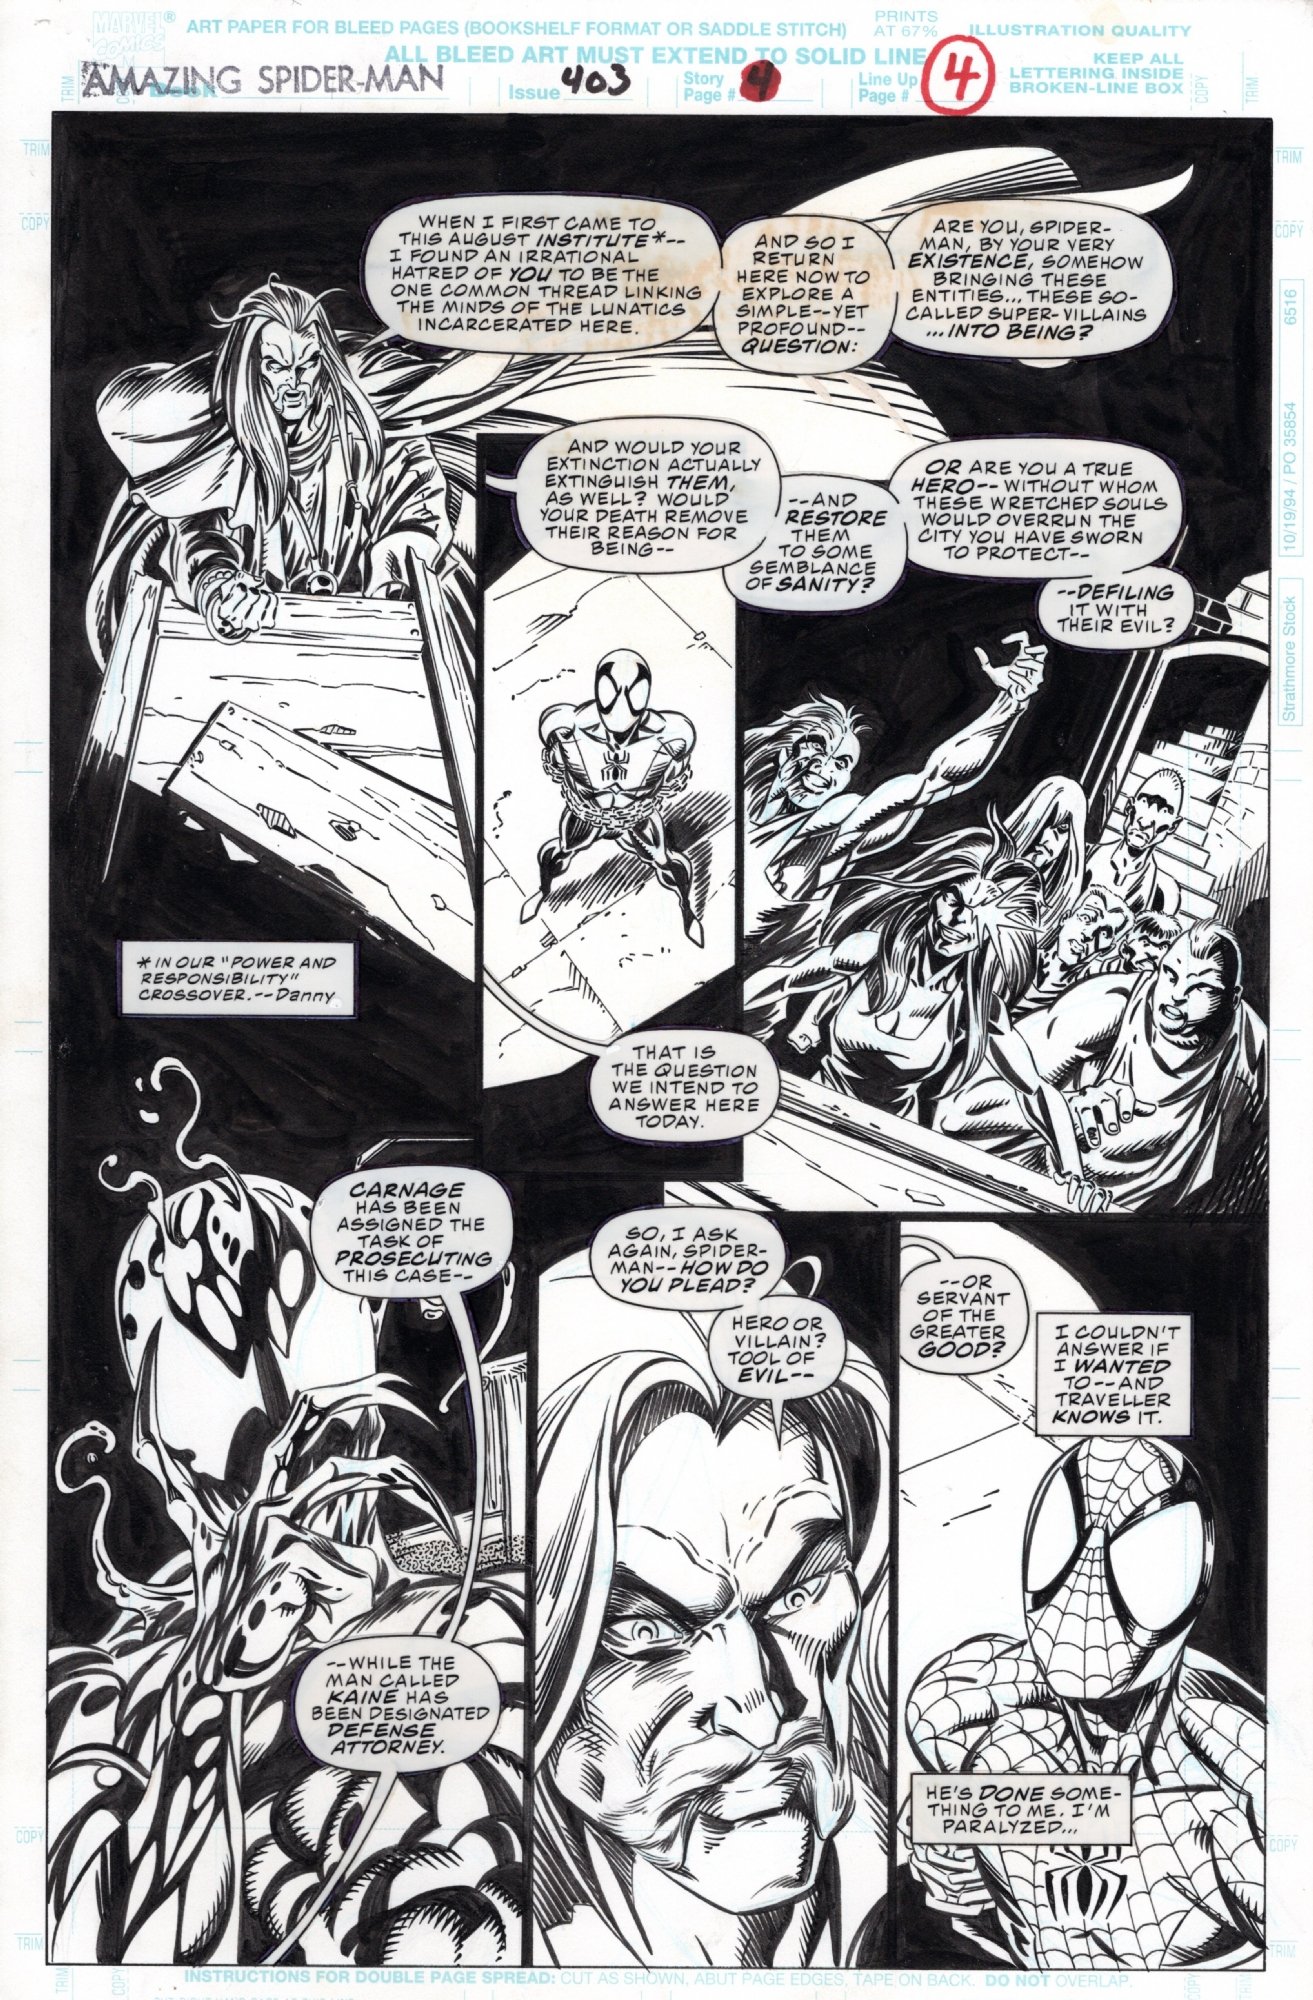 Amazing Spider-Man 403 page 4 by Mark Bagley, in Paul P Spiderversity's  AMAZING SPIDER-MAN 403 cover & interiors (Bagley, Mahlstedt & de la Rosa)  Comic Art Gallery Room